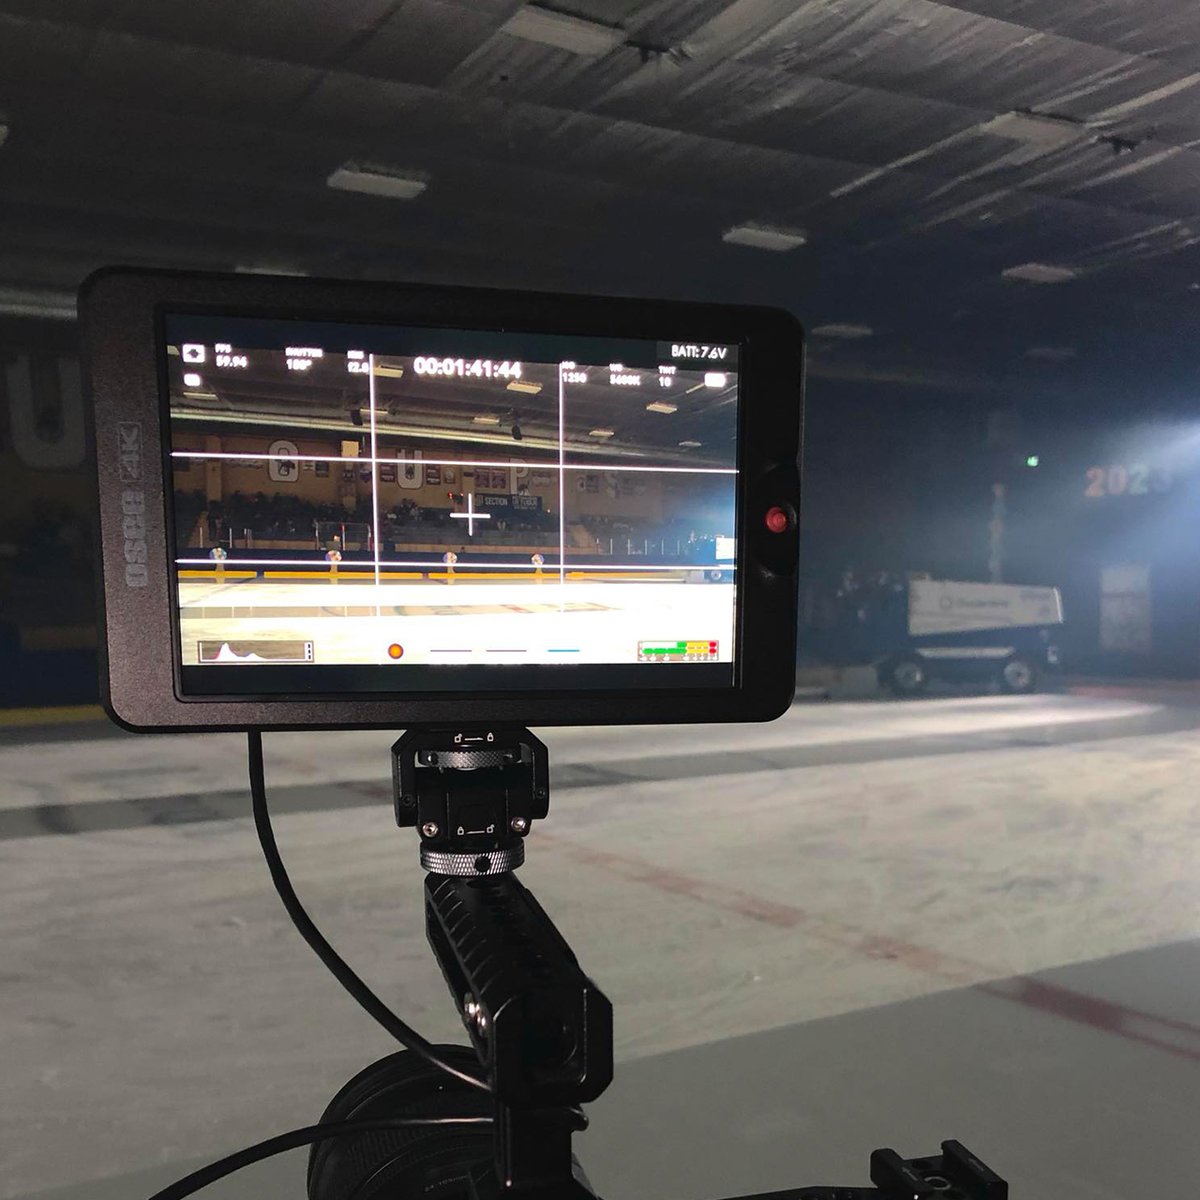 ⛷Ice skating competition 🎥#OseeT7 and #BMPCC4K 📸by @burnartproductions . . #oseemonitor #oseetech #moviemaking #onset #filmproduction #cameragear #onlocation #videography #directorofphotography #setlife #cinematography #filmmaking #producer #director #production #filmmaker